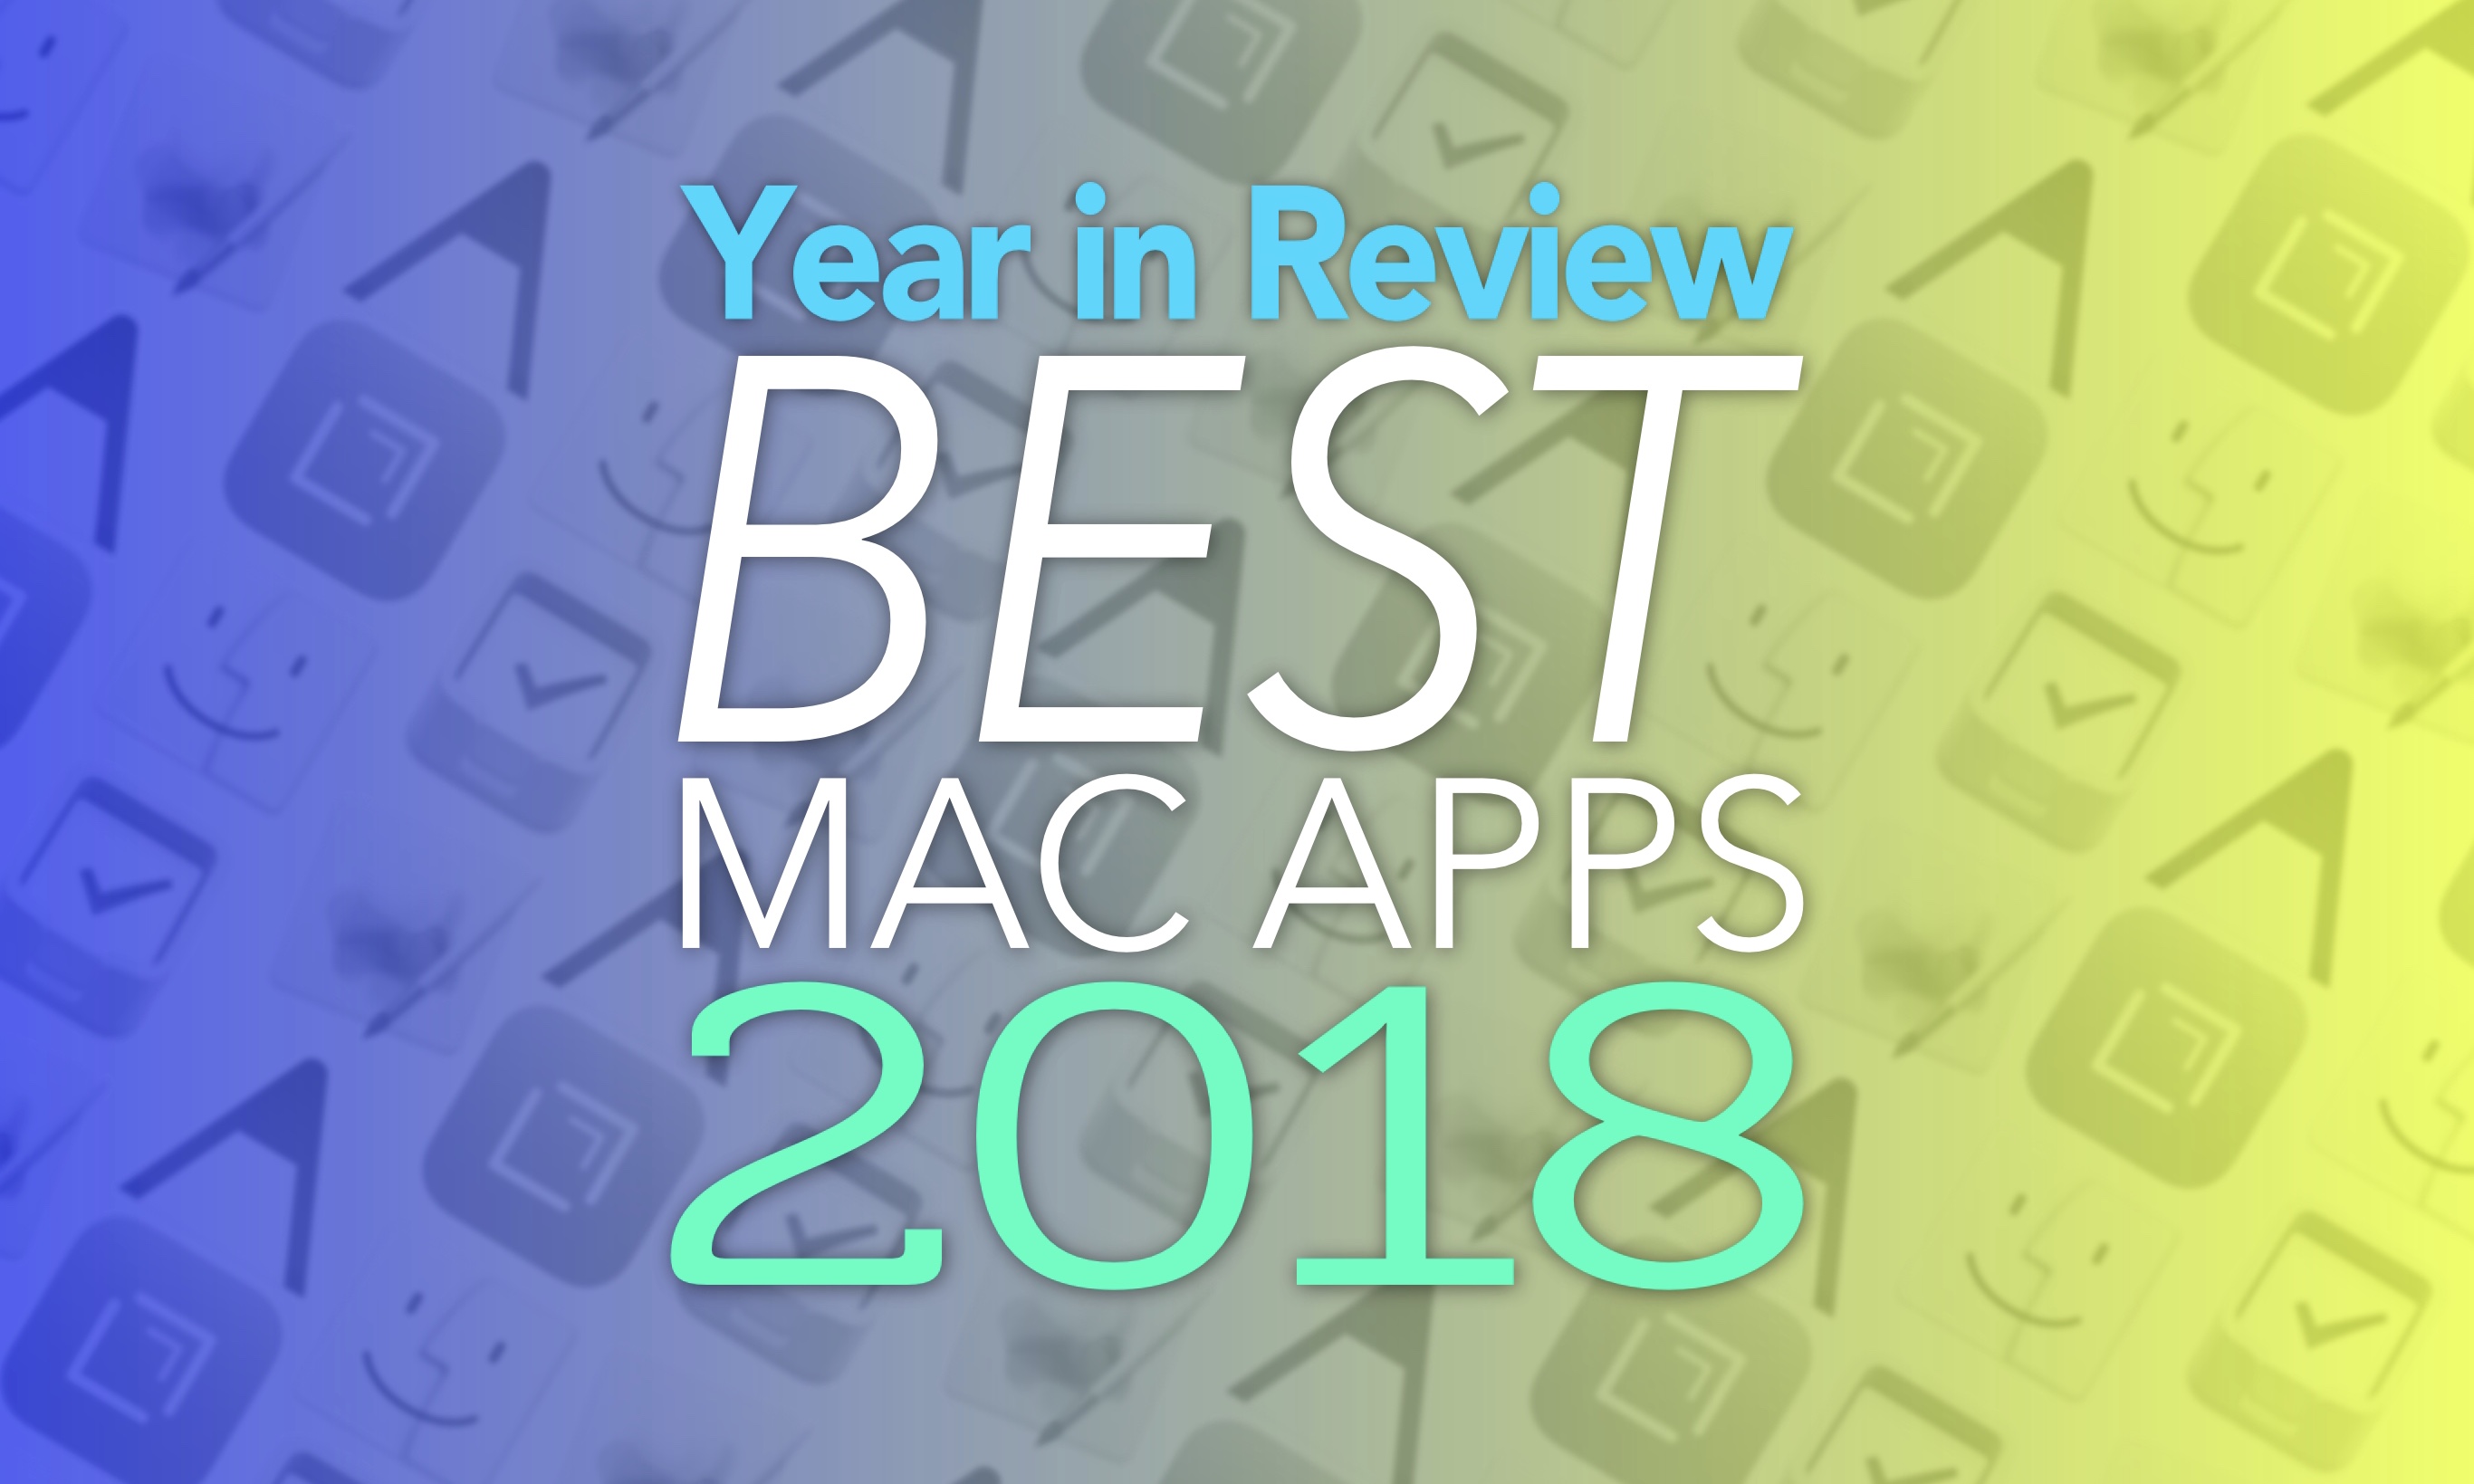 Year in Review Best Mac Apps 2018: Make Mac great again with one (or all!) of these top apps.